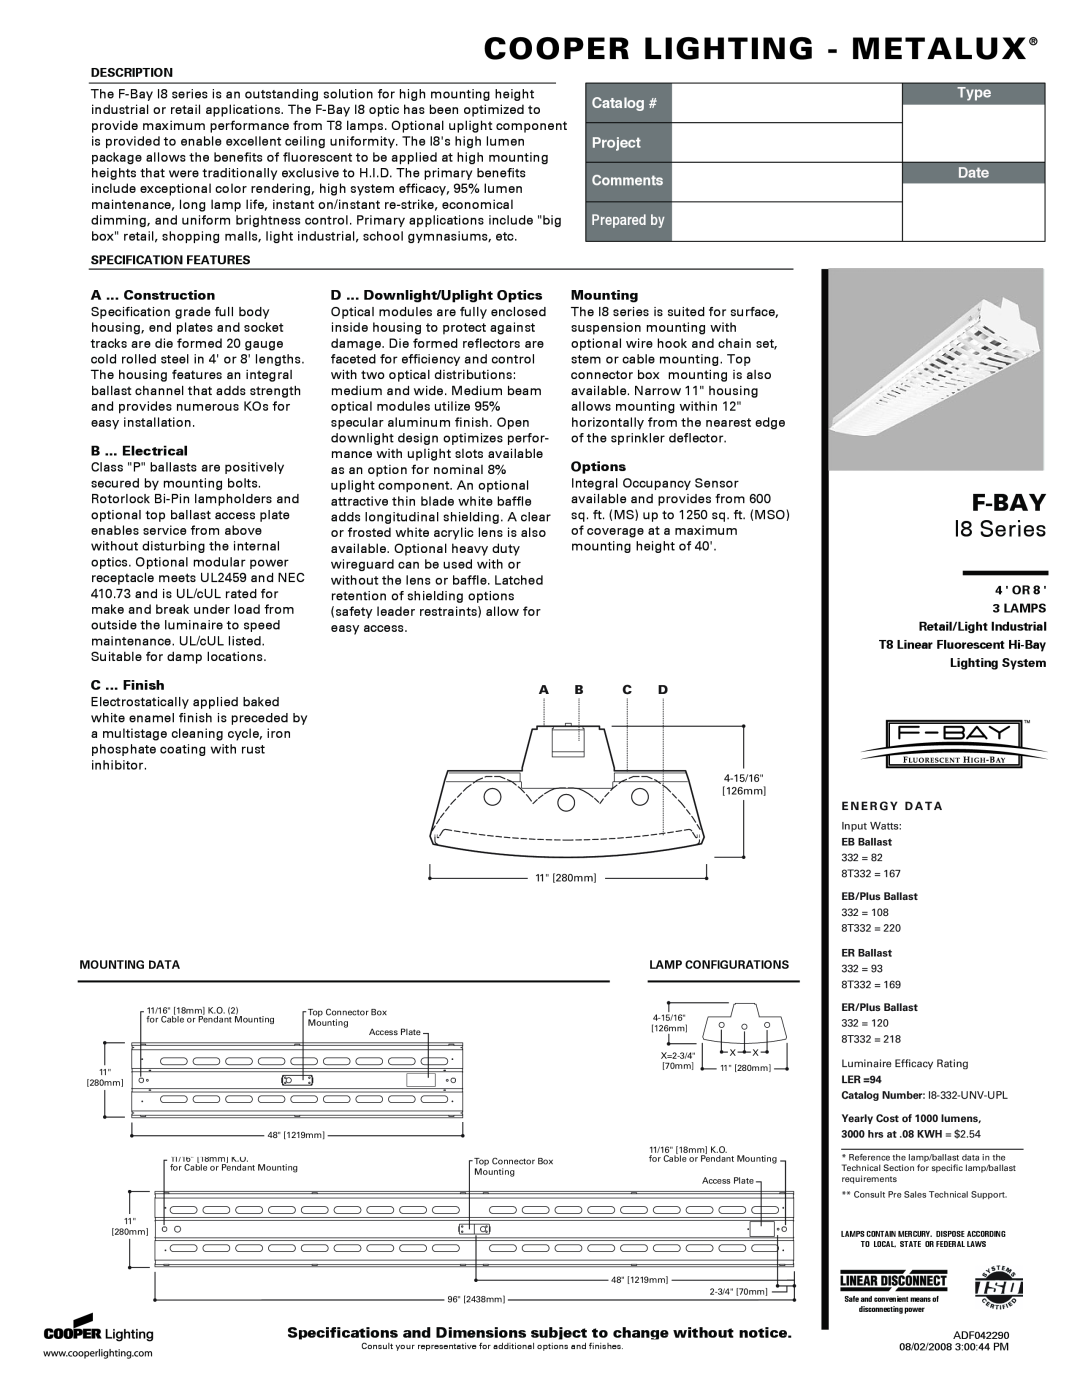 Cooper Lighting I8 Series specifications Cooper Lighting - Metalux, F-Bay, Catalog #, Project Comments, Prepared by, Type 